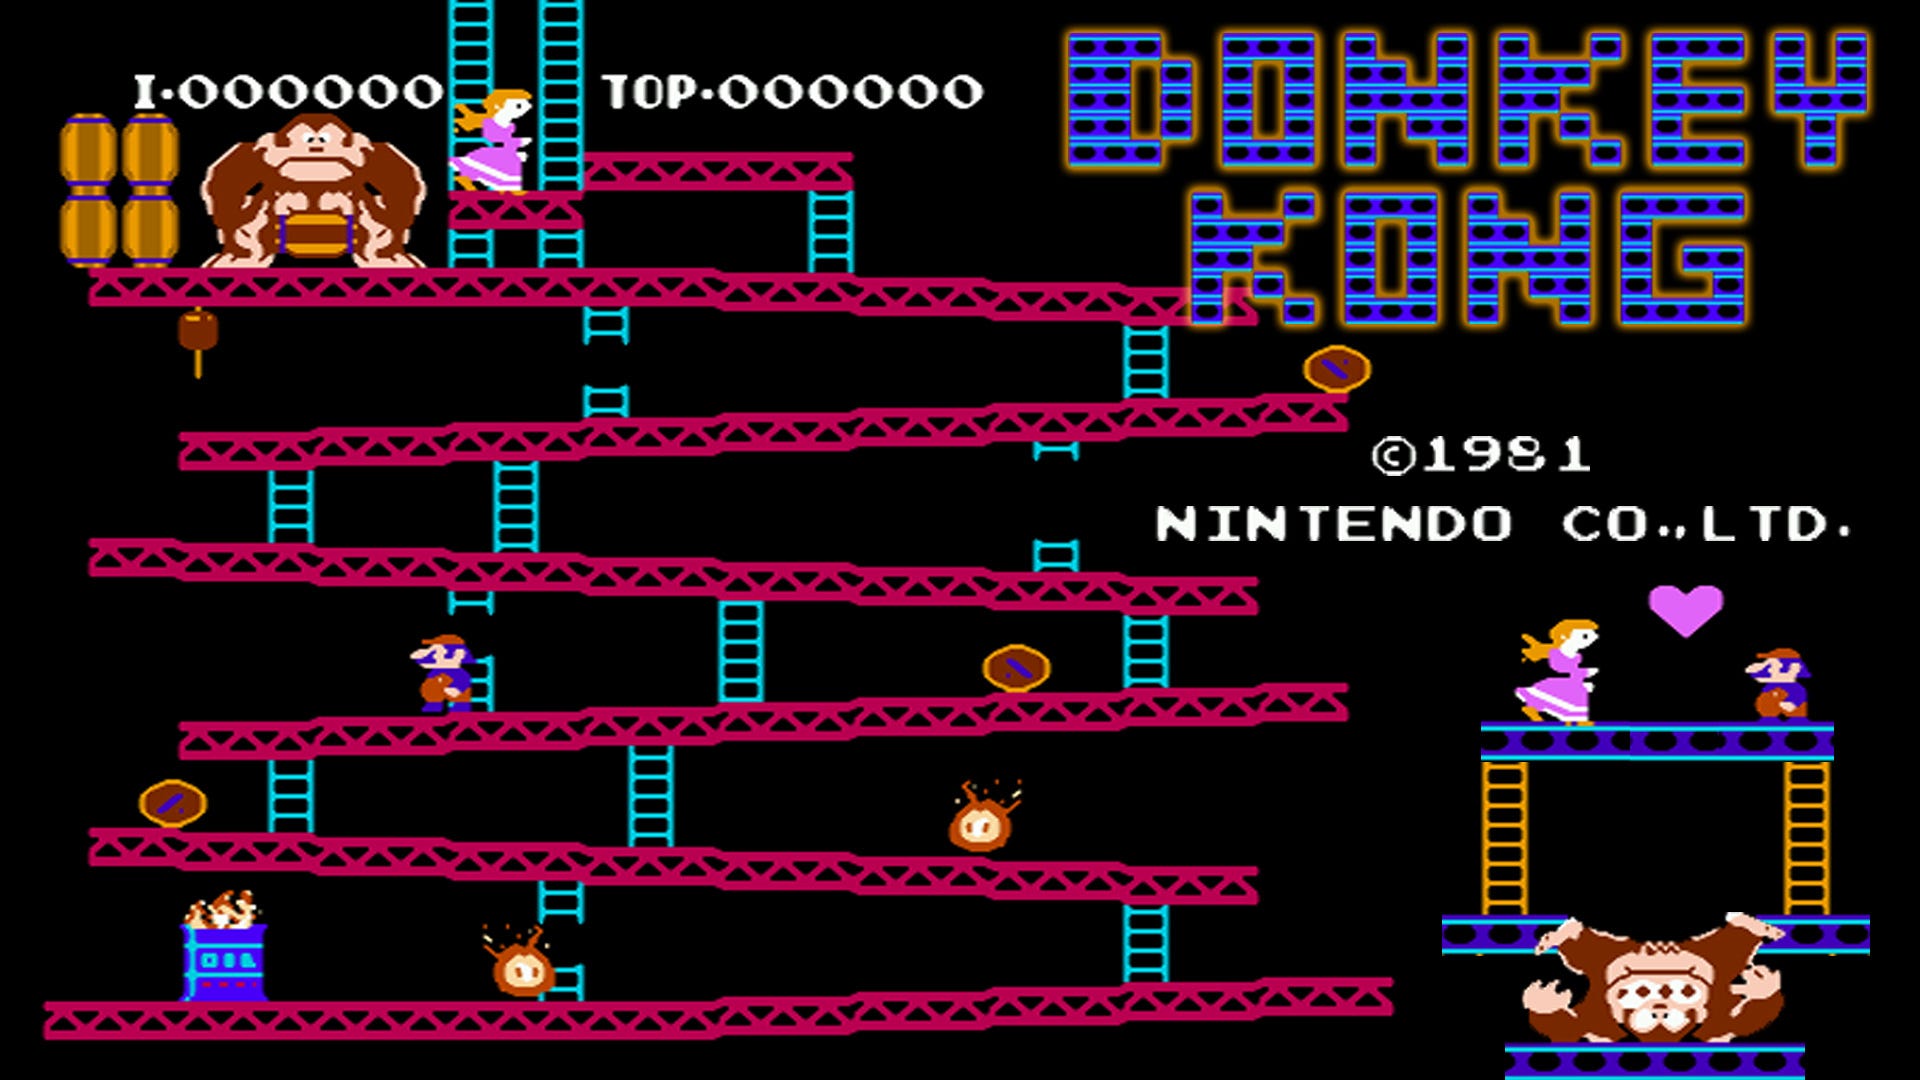 Donkey Kong One Of The Iconic Retro Video Games By Retro Games Medium